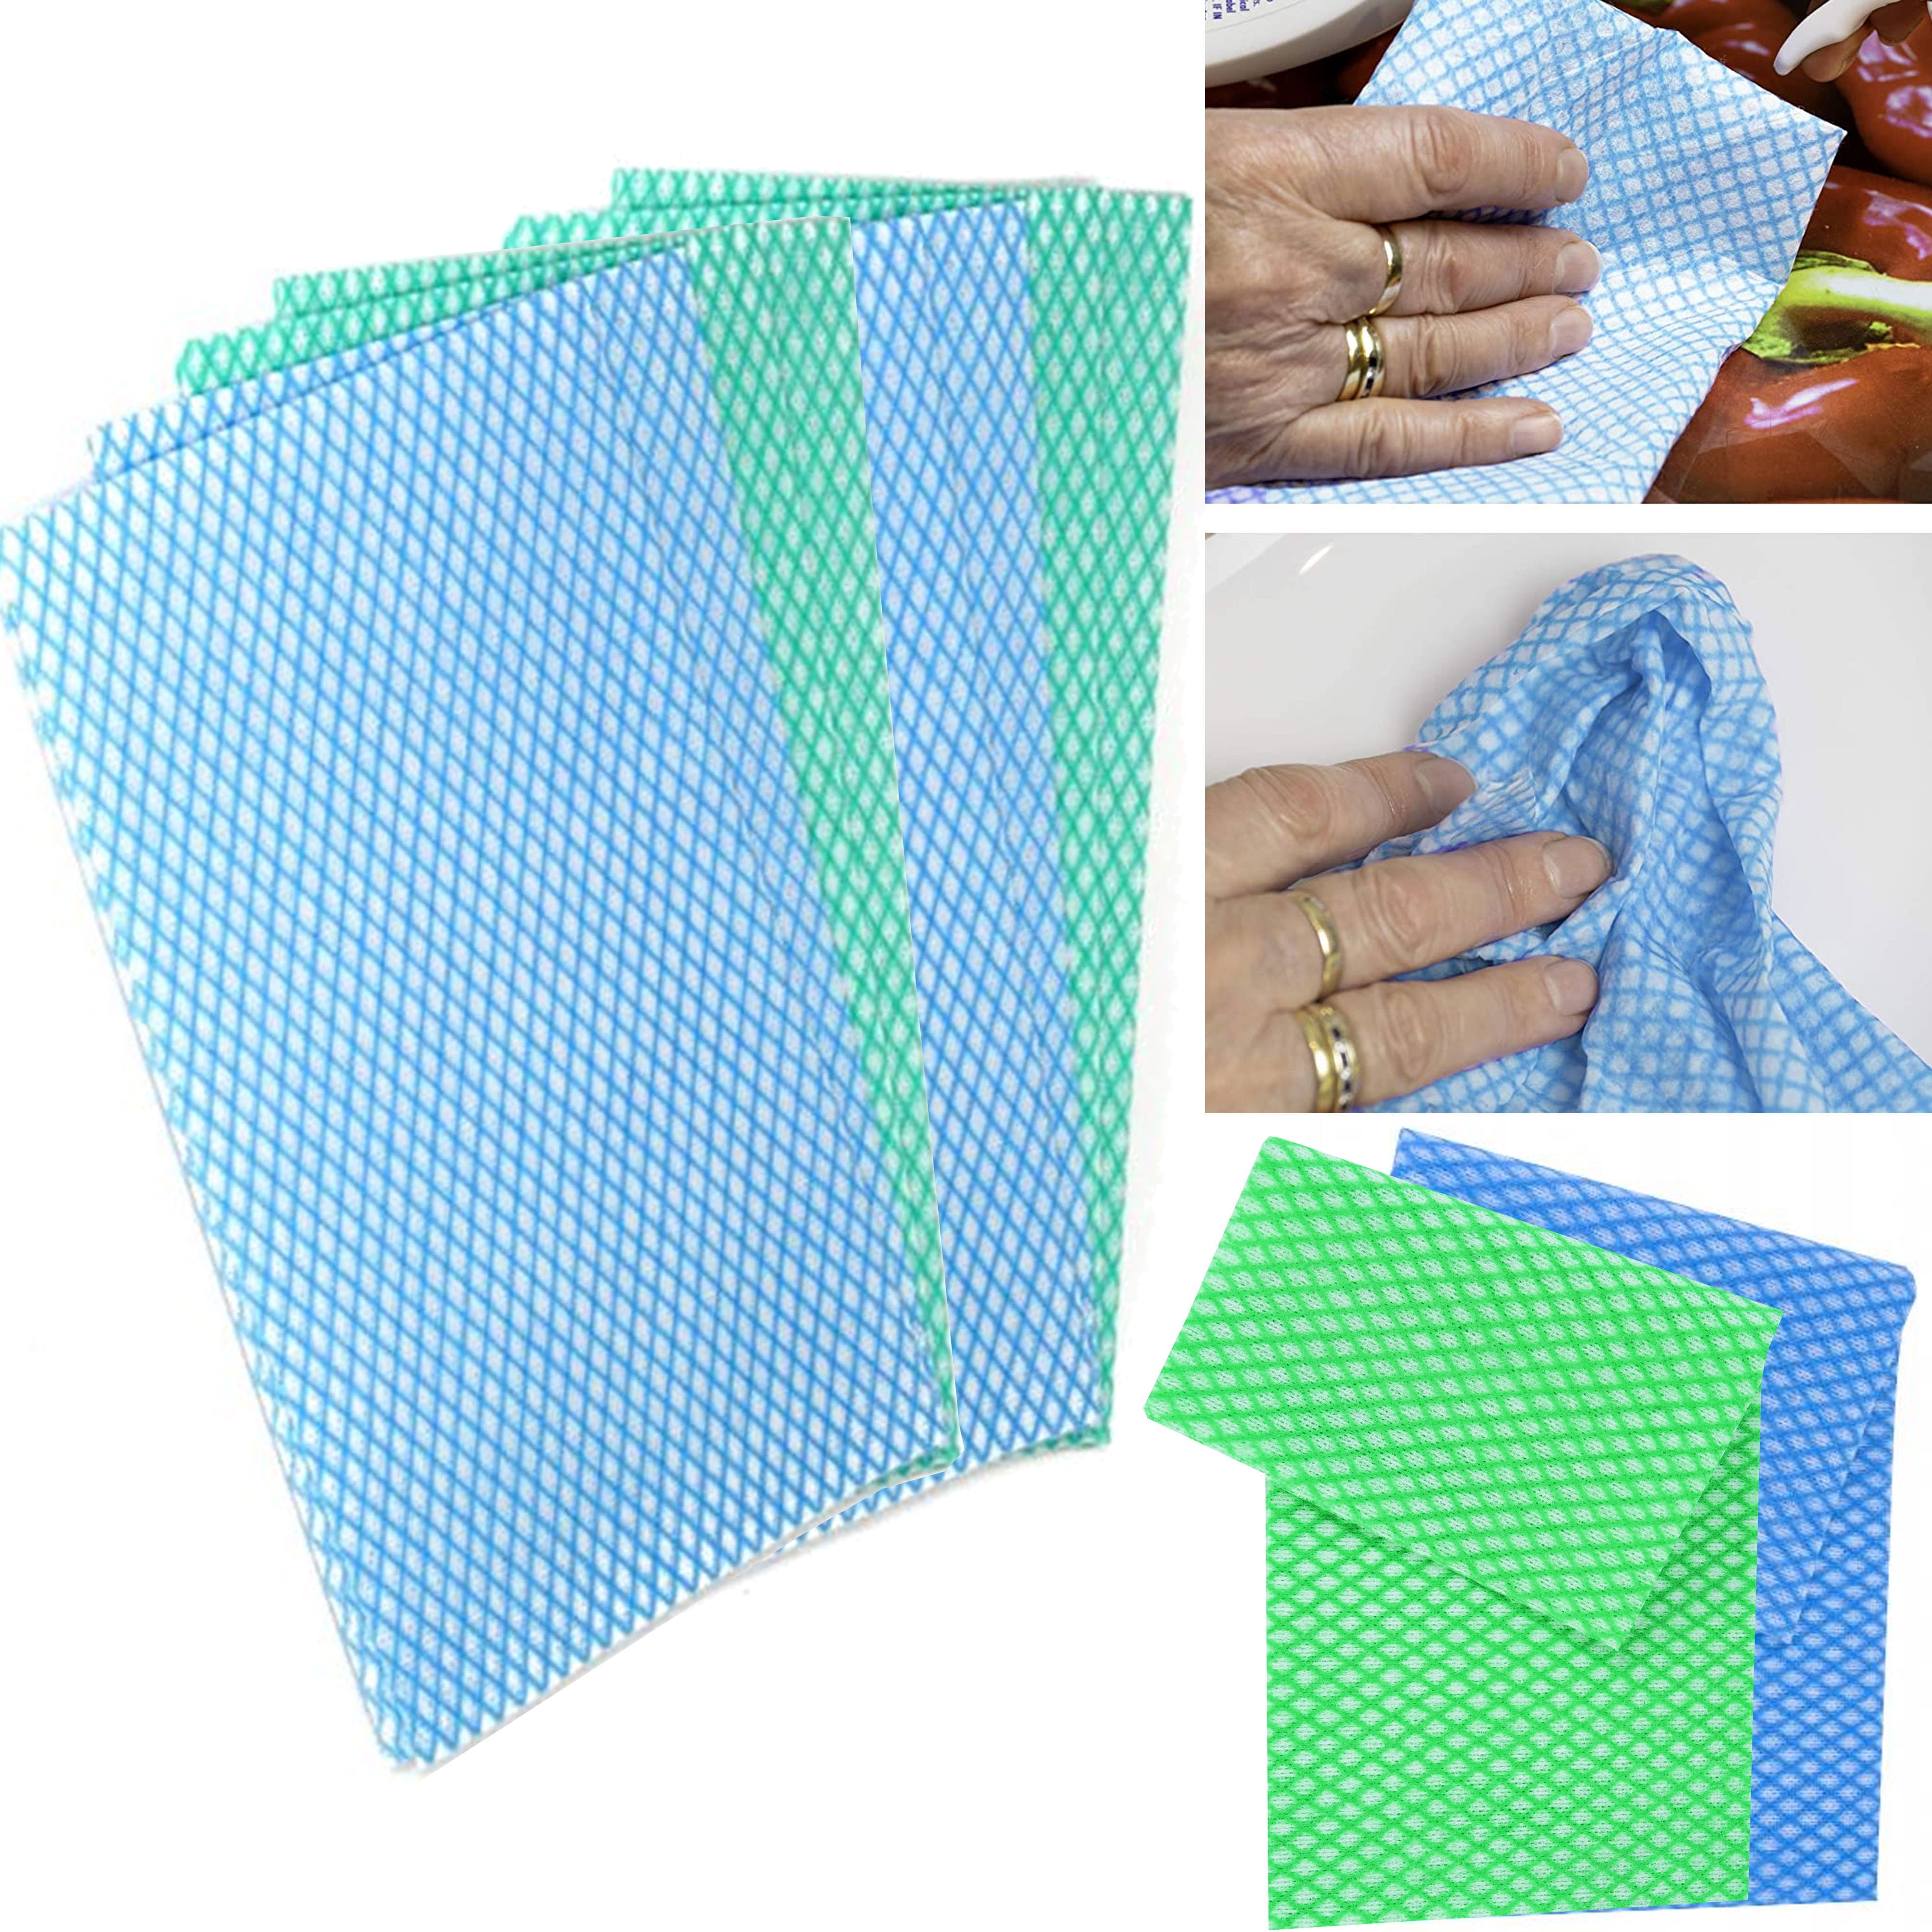 Roll Multi Purpose Disposable Kitchen Cloth Rolls Cleaning Rags Scouring  Pads Dish Towels Kitchen Wipes Reusable Washcloths JY0224 From  Dreamhome_jy, $3.69